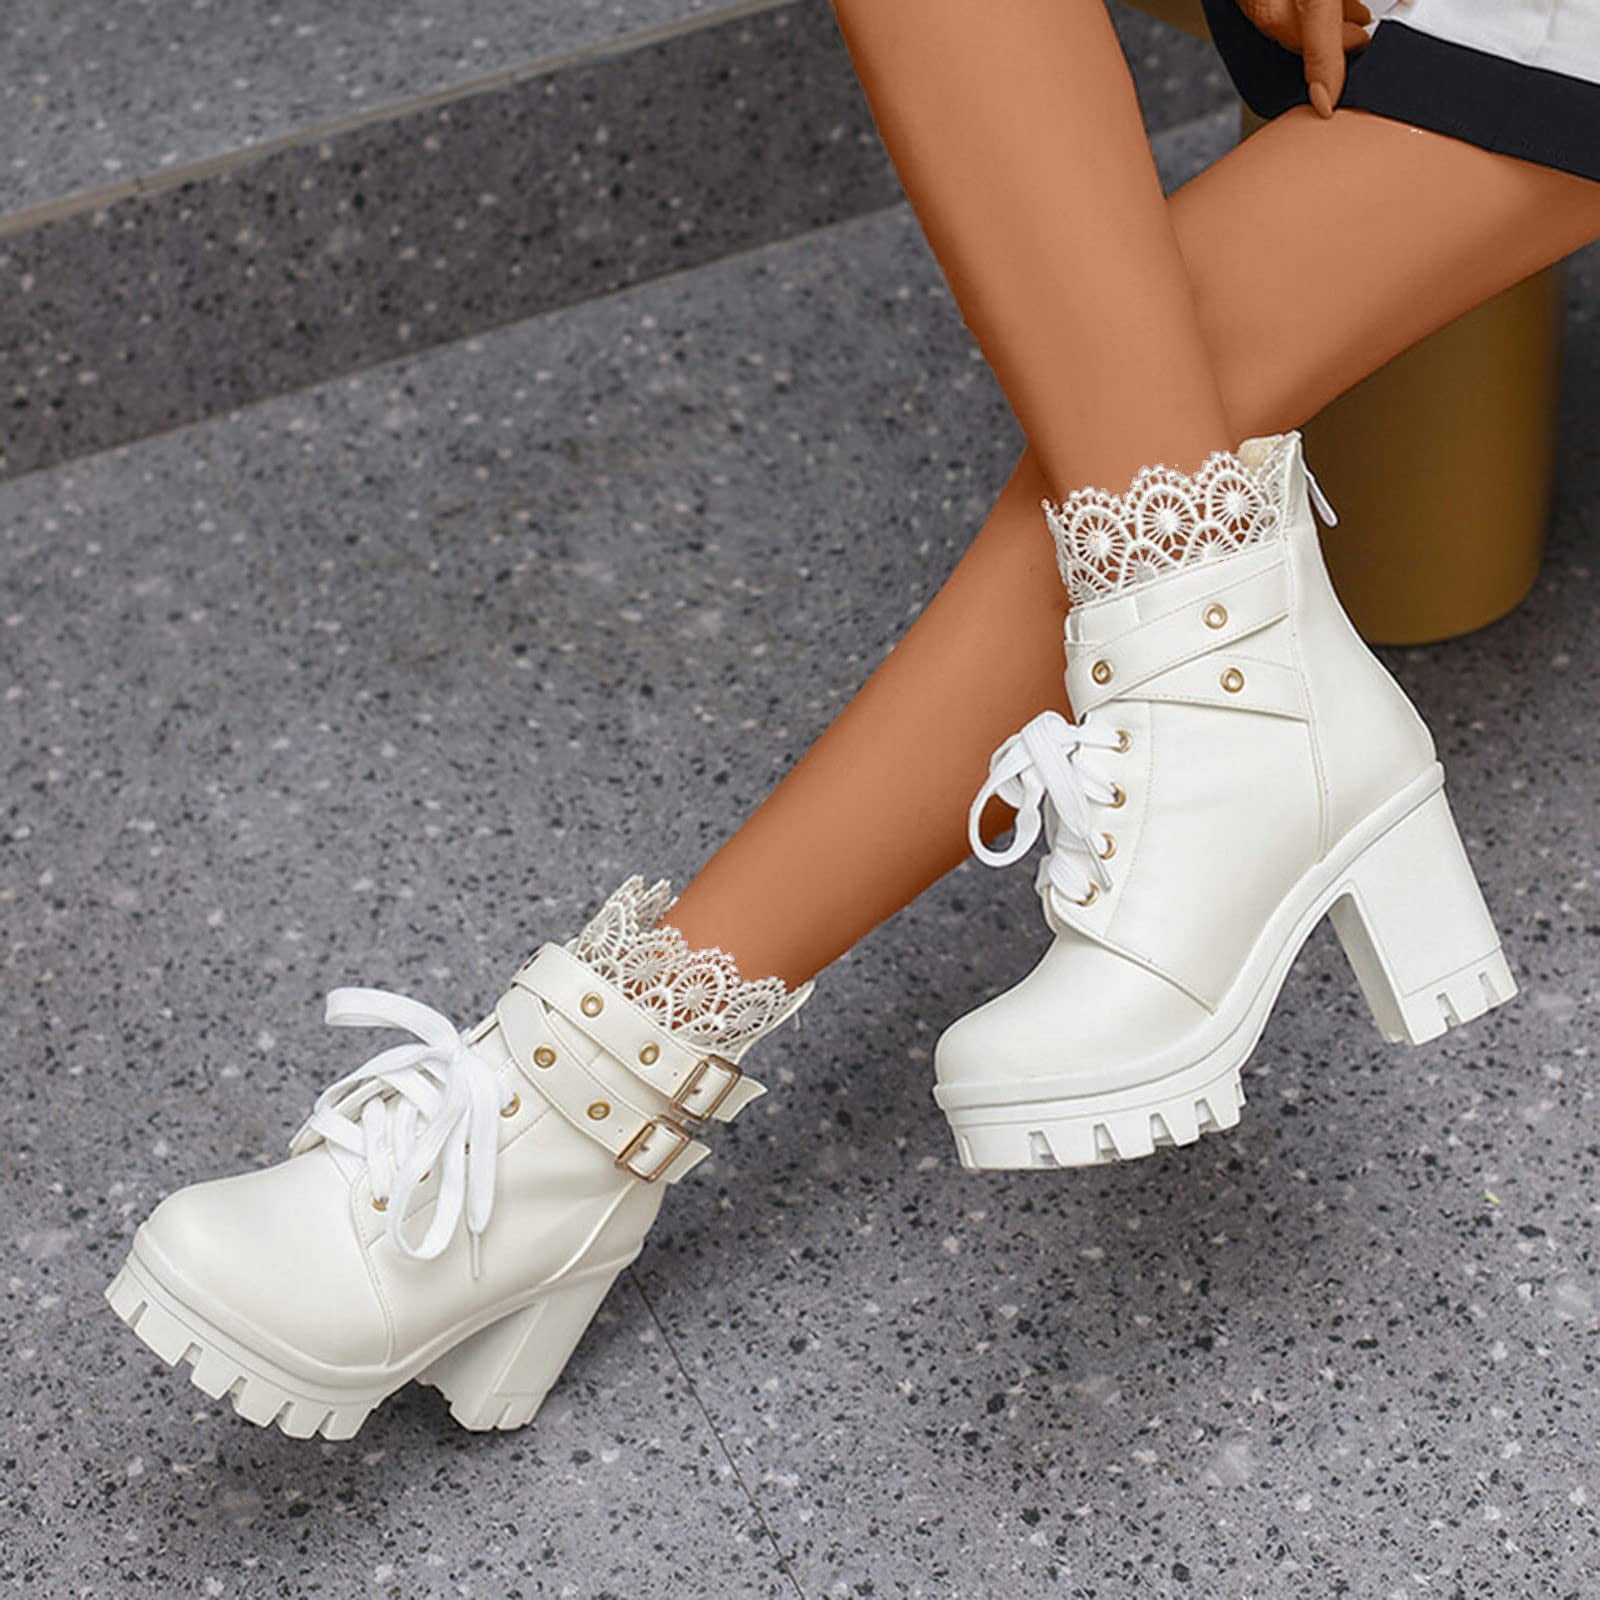 Xiomara - White, 4 inch Stiletto Heel, cross design lace up ankle boot with  fishnet mesh - Burju Shoes